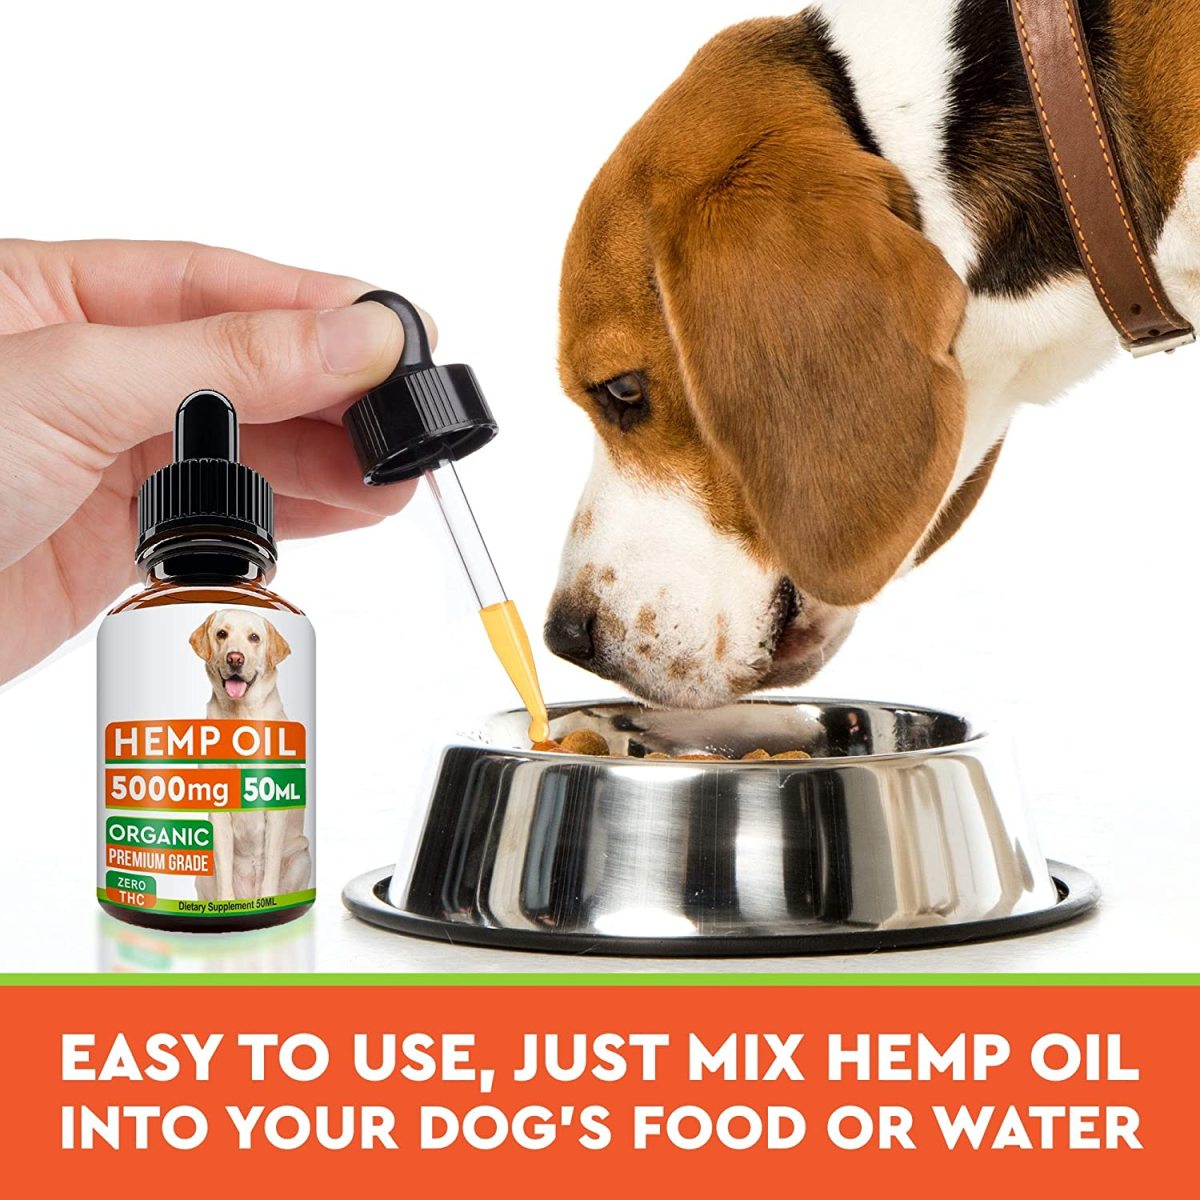 does-your-dog-struggle-with-thunder-fireworks-and-other-loud-noises-hemp-oil-might-be-the-answer